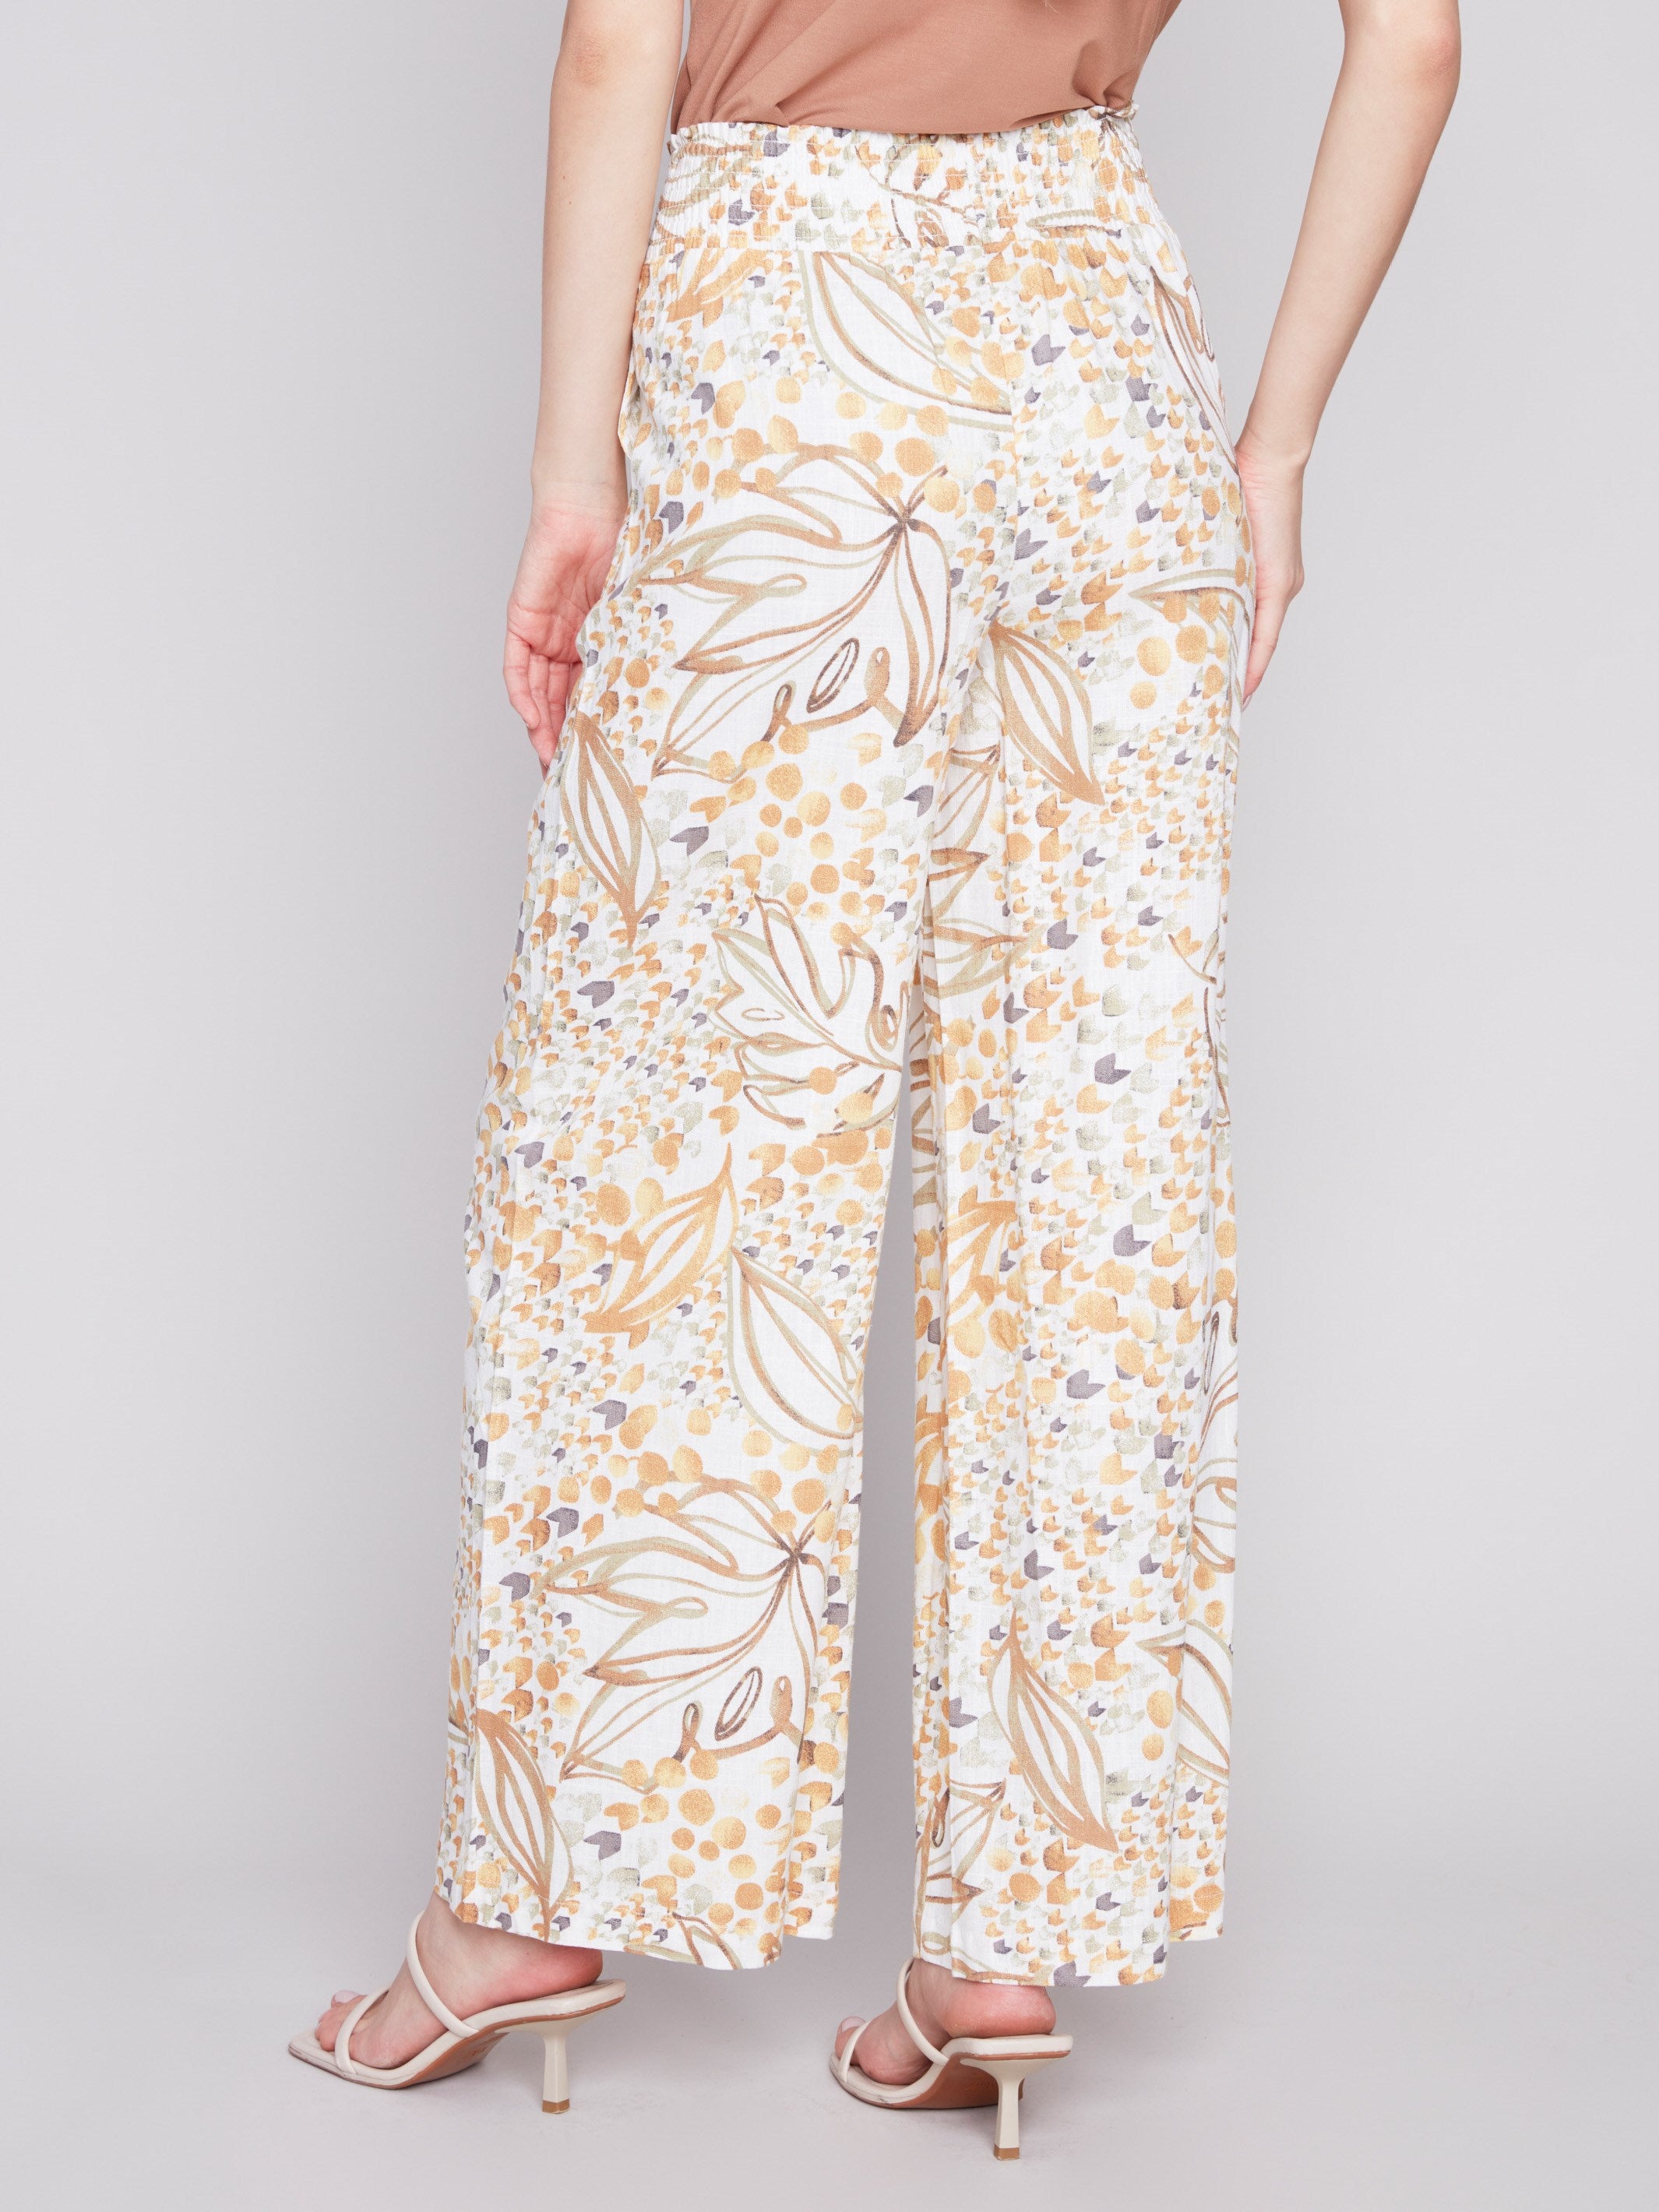 Printed Elastic Waist Pull-On Pants - Dune - Charlie B Collection Canada - Image 3